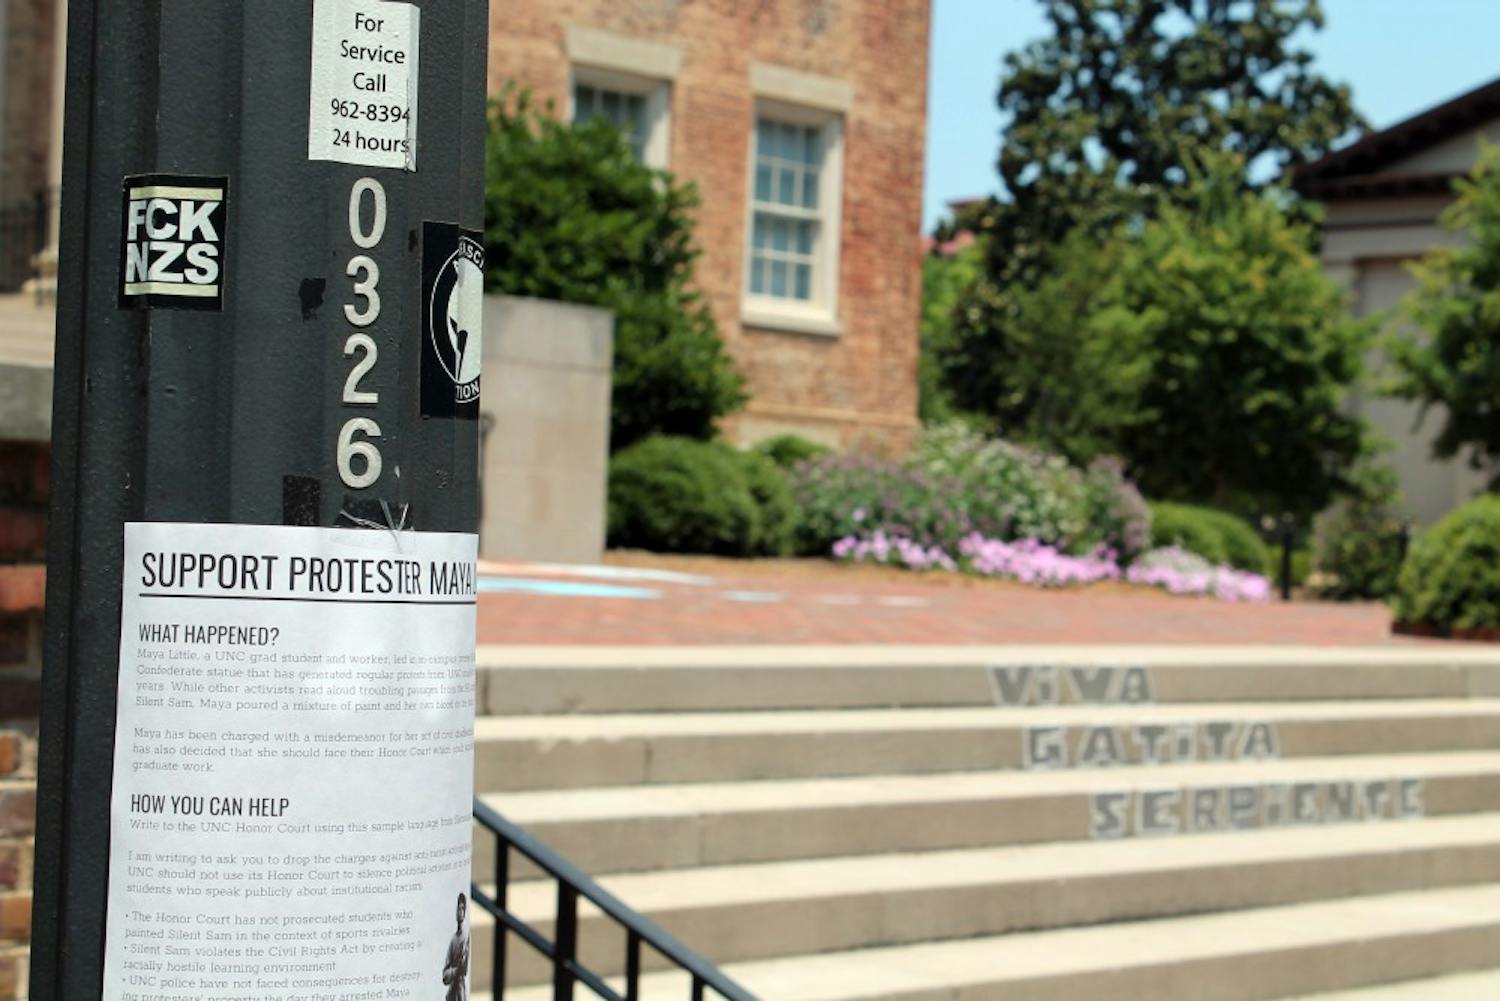 On July 11, protestors chalked "We Have Receipts" and "McCracken Lied" on the bricks in front of South Building. Additionally, "Viva Gatito Serpiente" was chalked onto the stairs, near flyers in support of Silent Sam protestor Maya Little. 